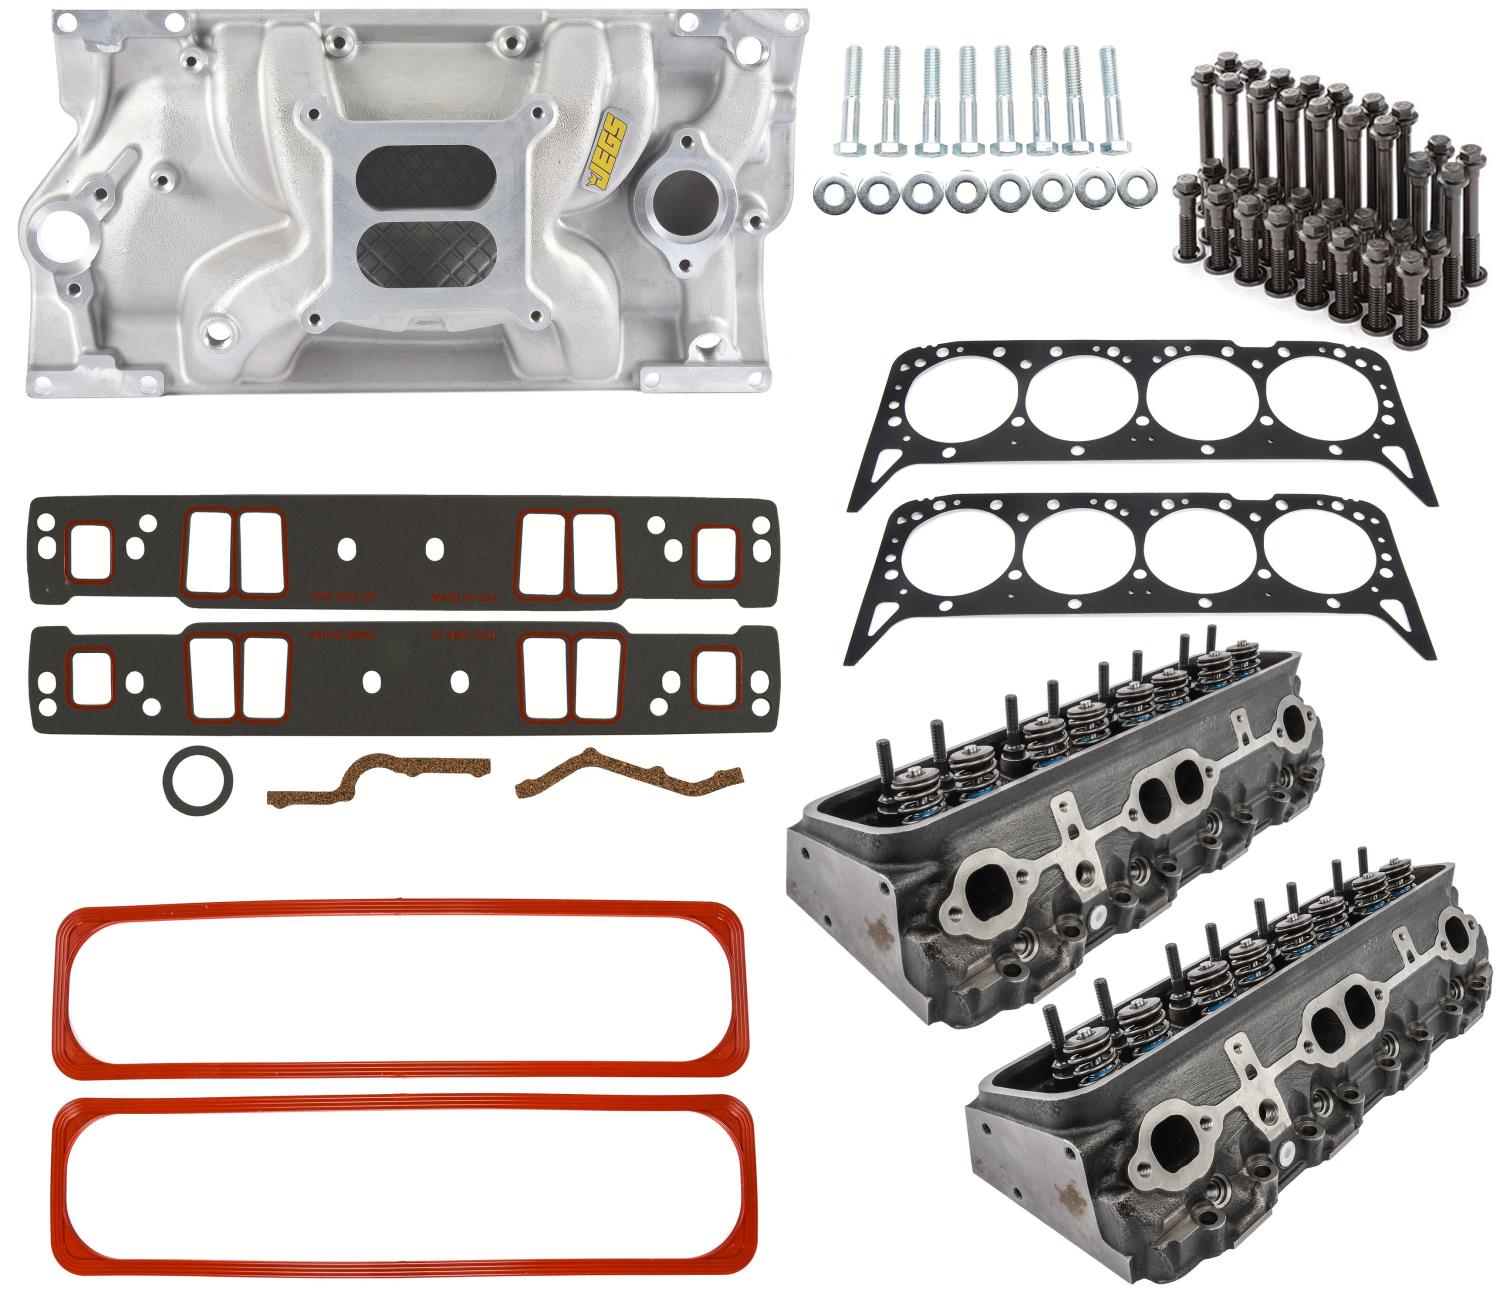 Vortec Cylinder Heads & High Rise Intake Manifold Kit for 1996-2002 Chevy Small Block 5.7L Engine [Satin Dual Plane]